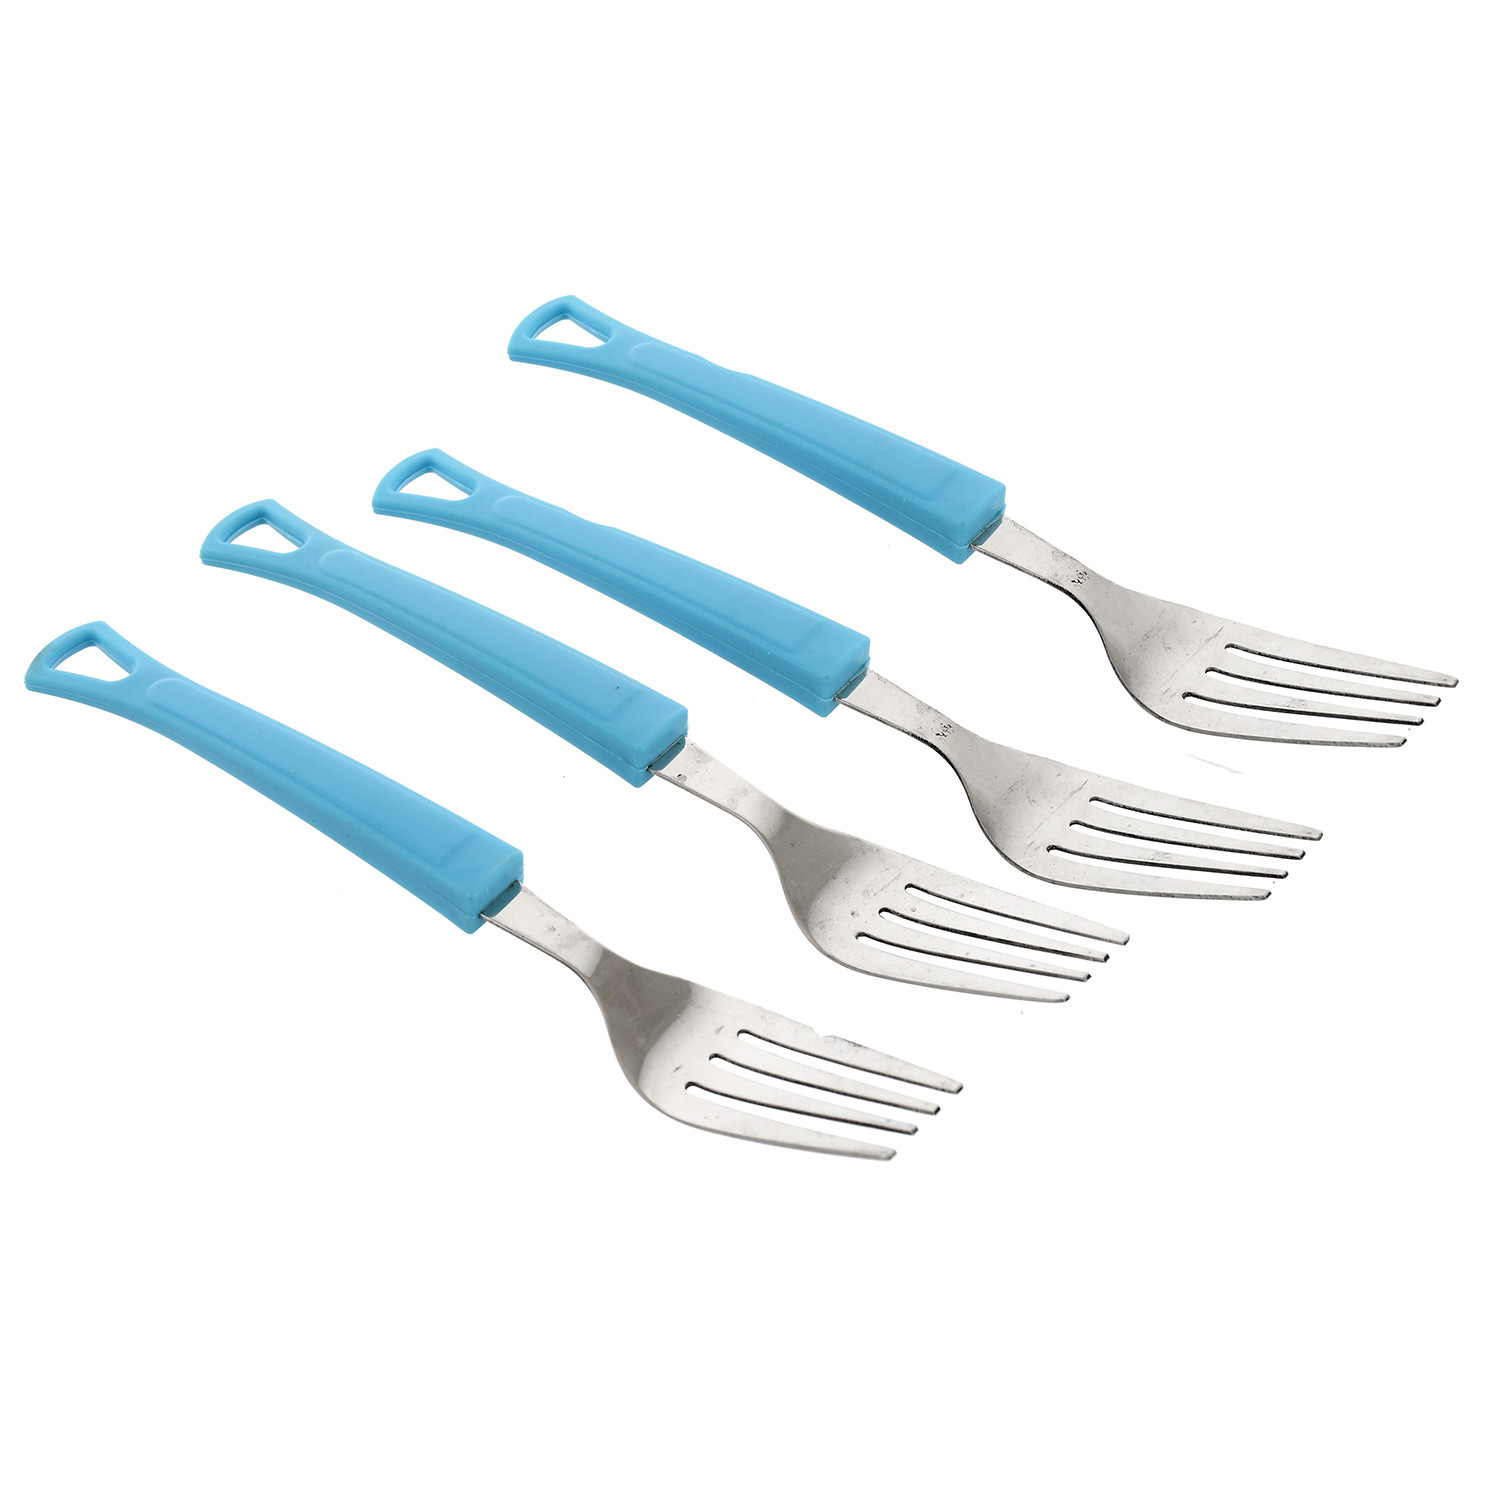 Kuber Industries Swastic Cutlery Set 24 pcs with Stand Made from Stainless Steel and ABS Plastic (Blue) -CTKTC39442